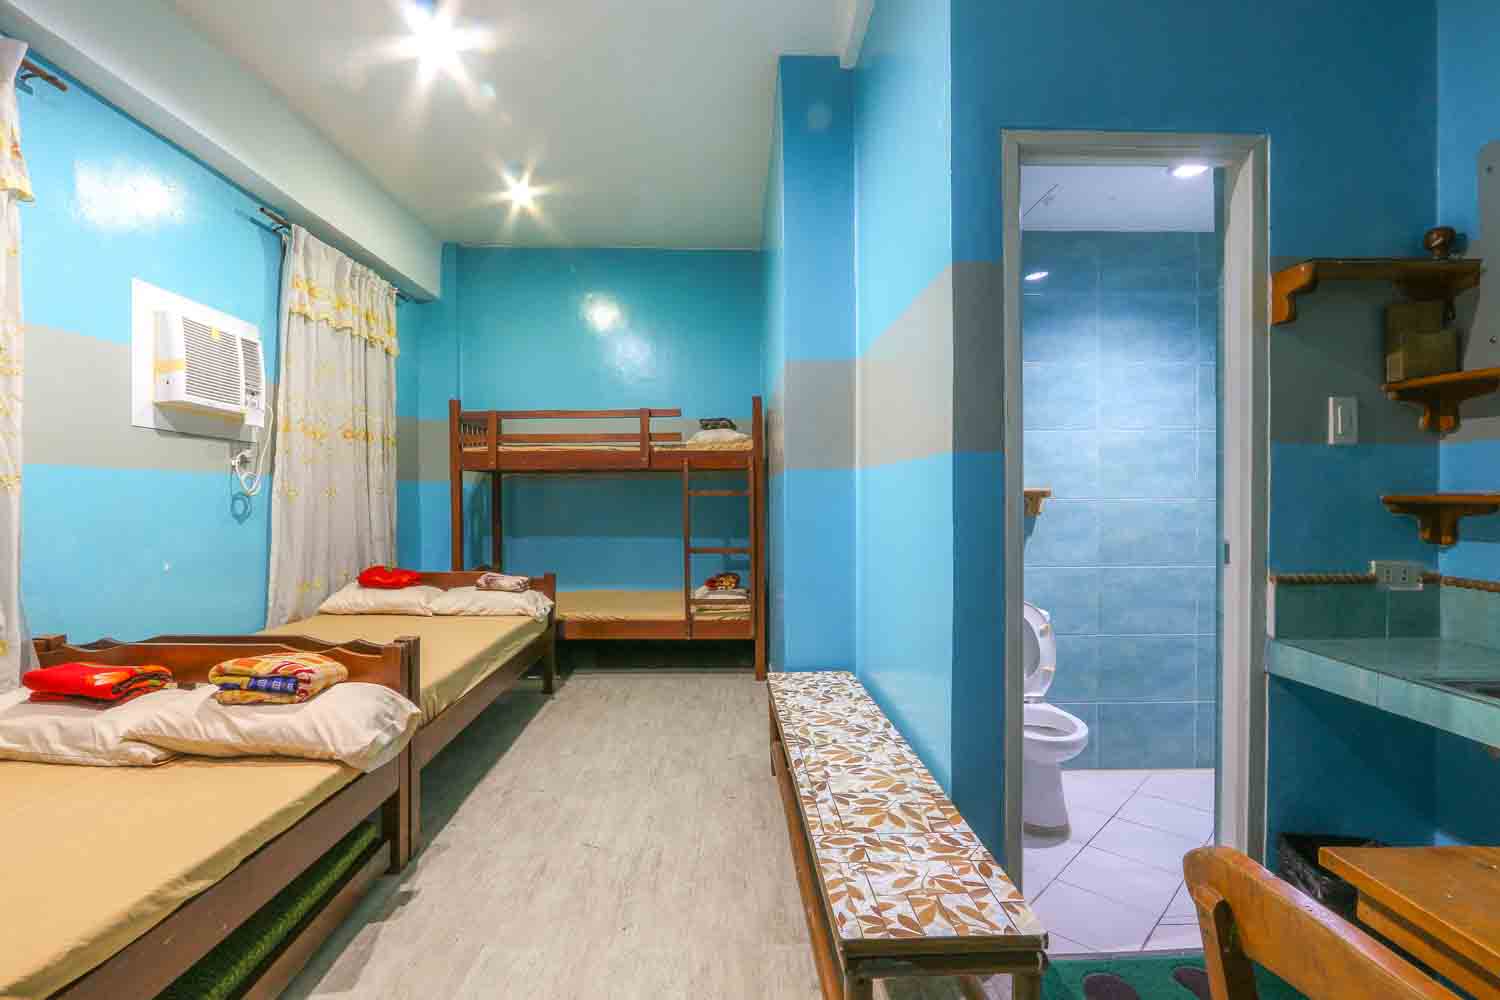 www.rooms498.com Budget, Cheap, Affordable Daily Monthly Room Rentals - Travel Inn, Student Dormitory, Hotel, Motel, Hostel, Houses Apartment Rooms for Rent with Aircon